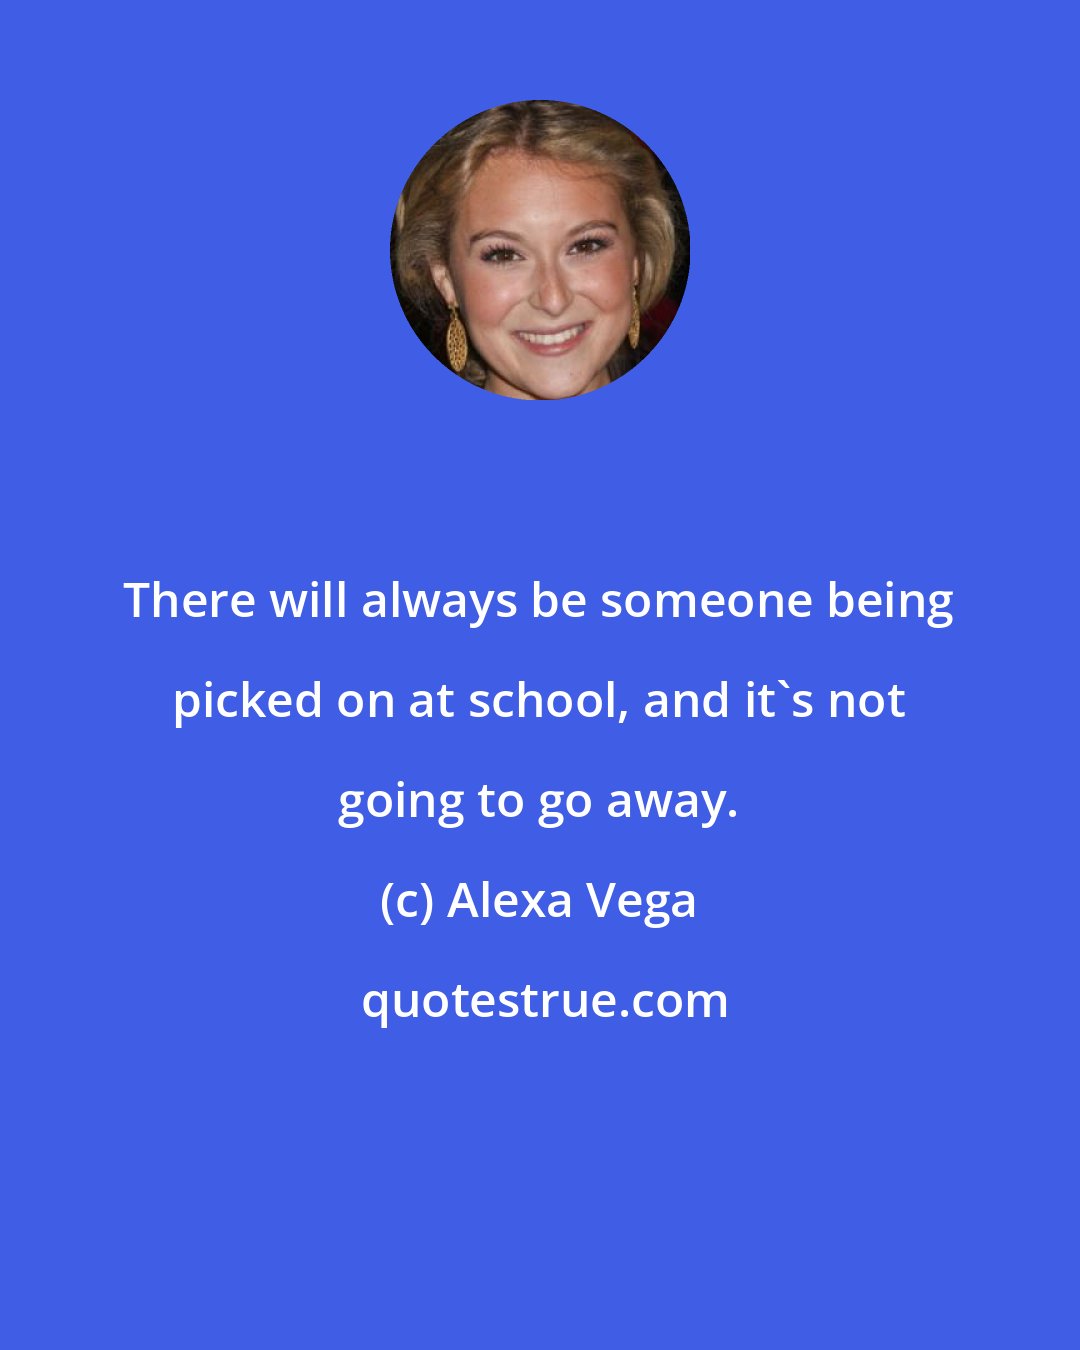 Alexa Vega: There will always be someone being picked on at school, and it's not going to go away.